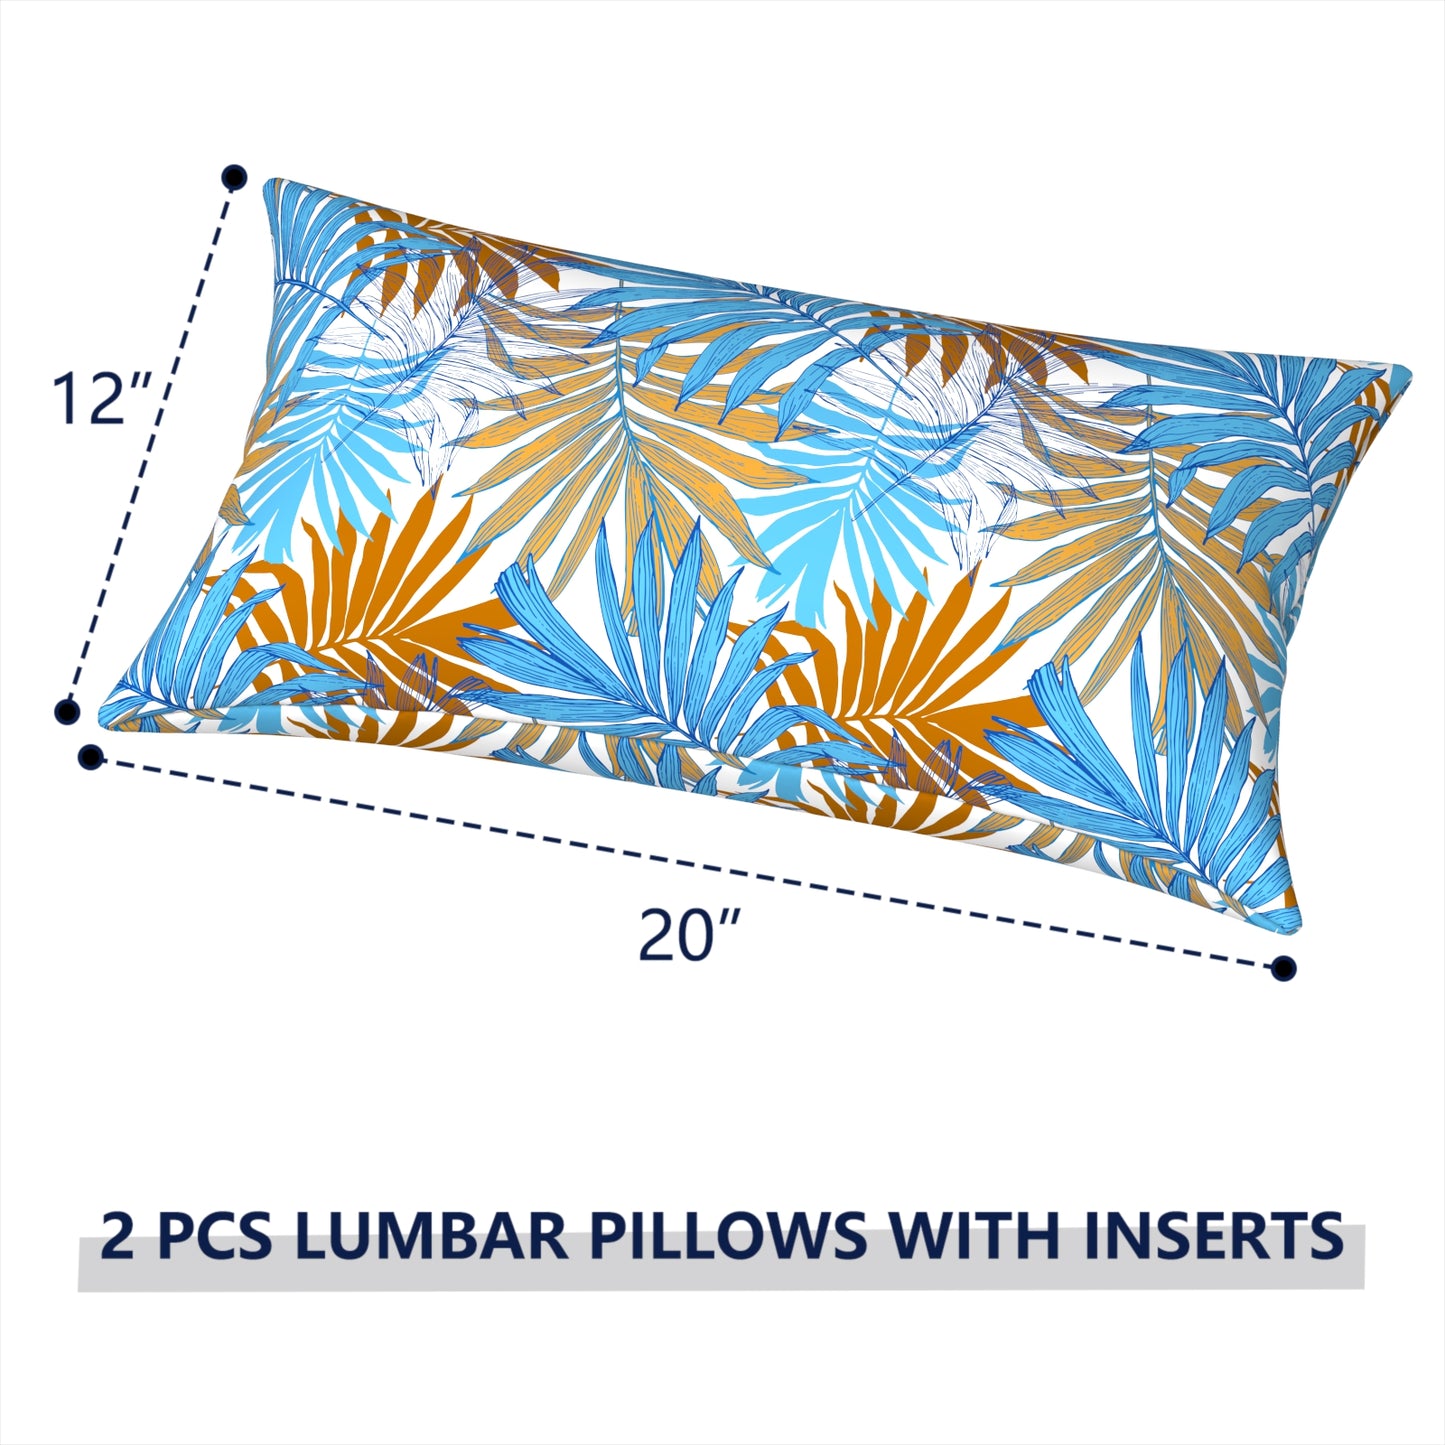 Melody Elephant Outdoor/Indoor Lumbar Pillows, Water Repellent Cushion Pillows, 12x20 Inch, Outdoor Pillows with Inserts for Home Garden, Pack of 2, Piermont Leaves Blue